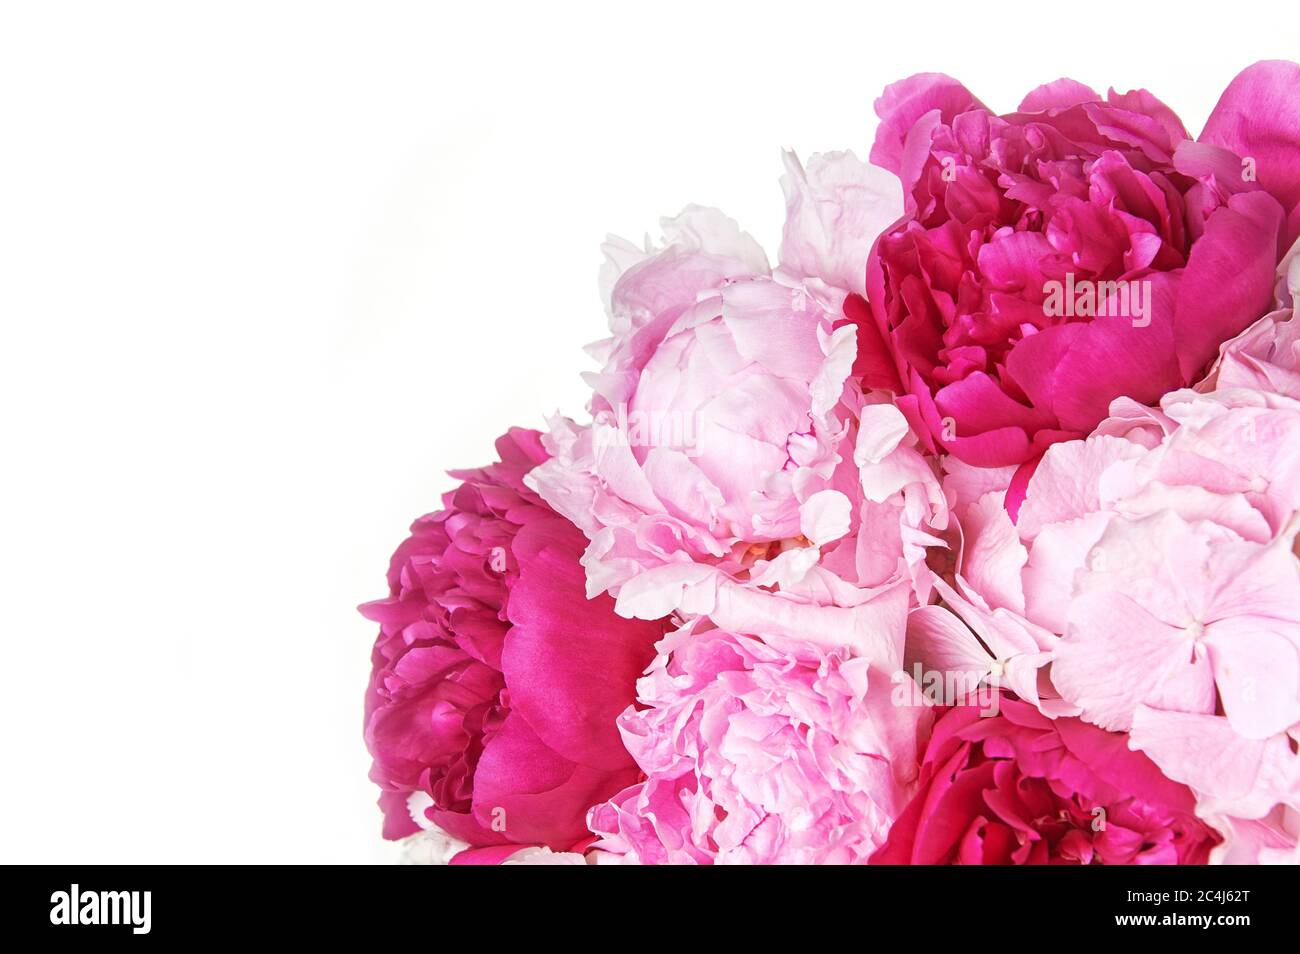 Background with beautiful pink flowers peonies. Stock Photo